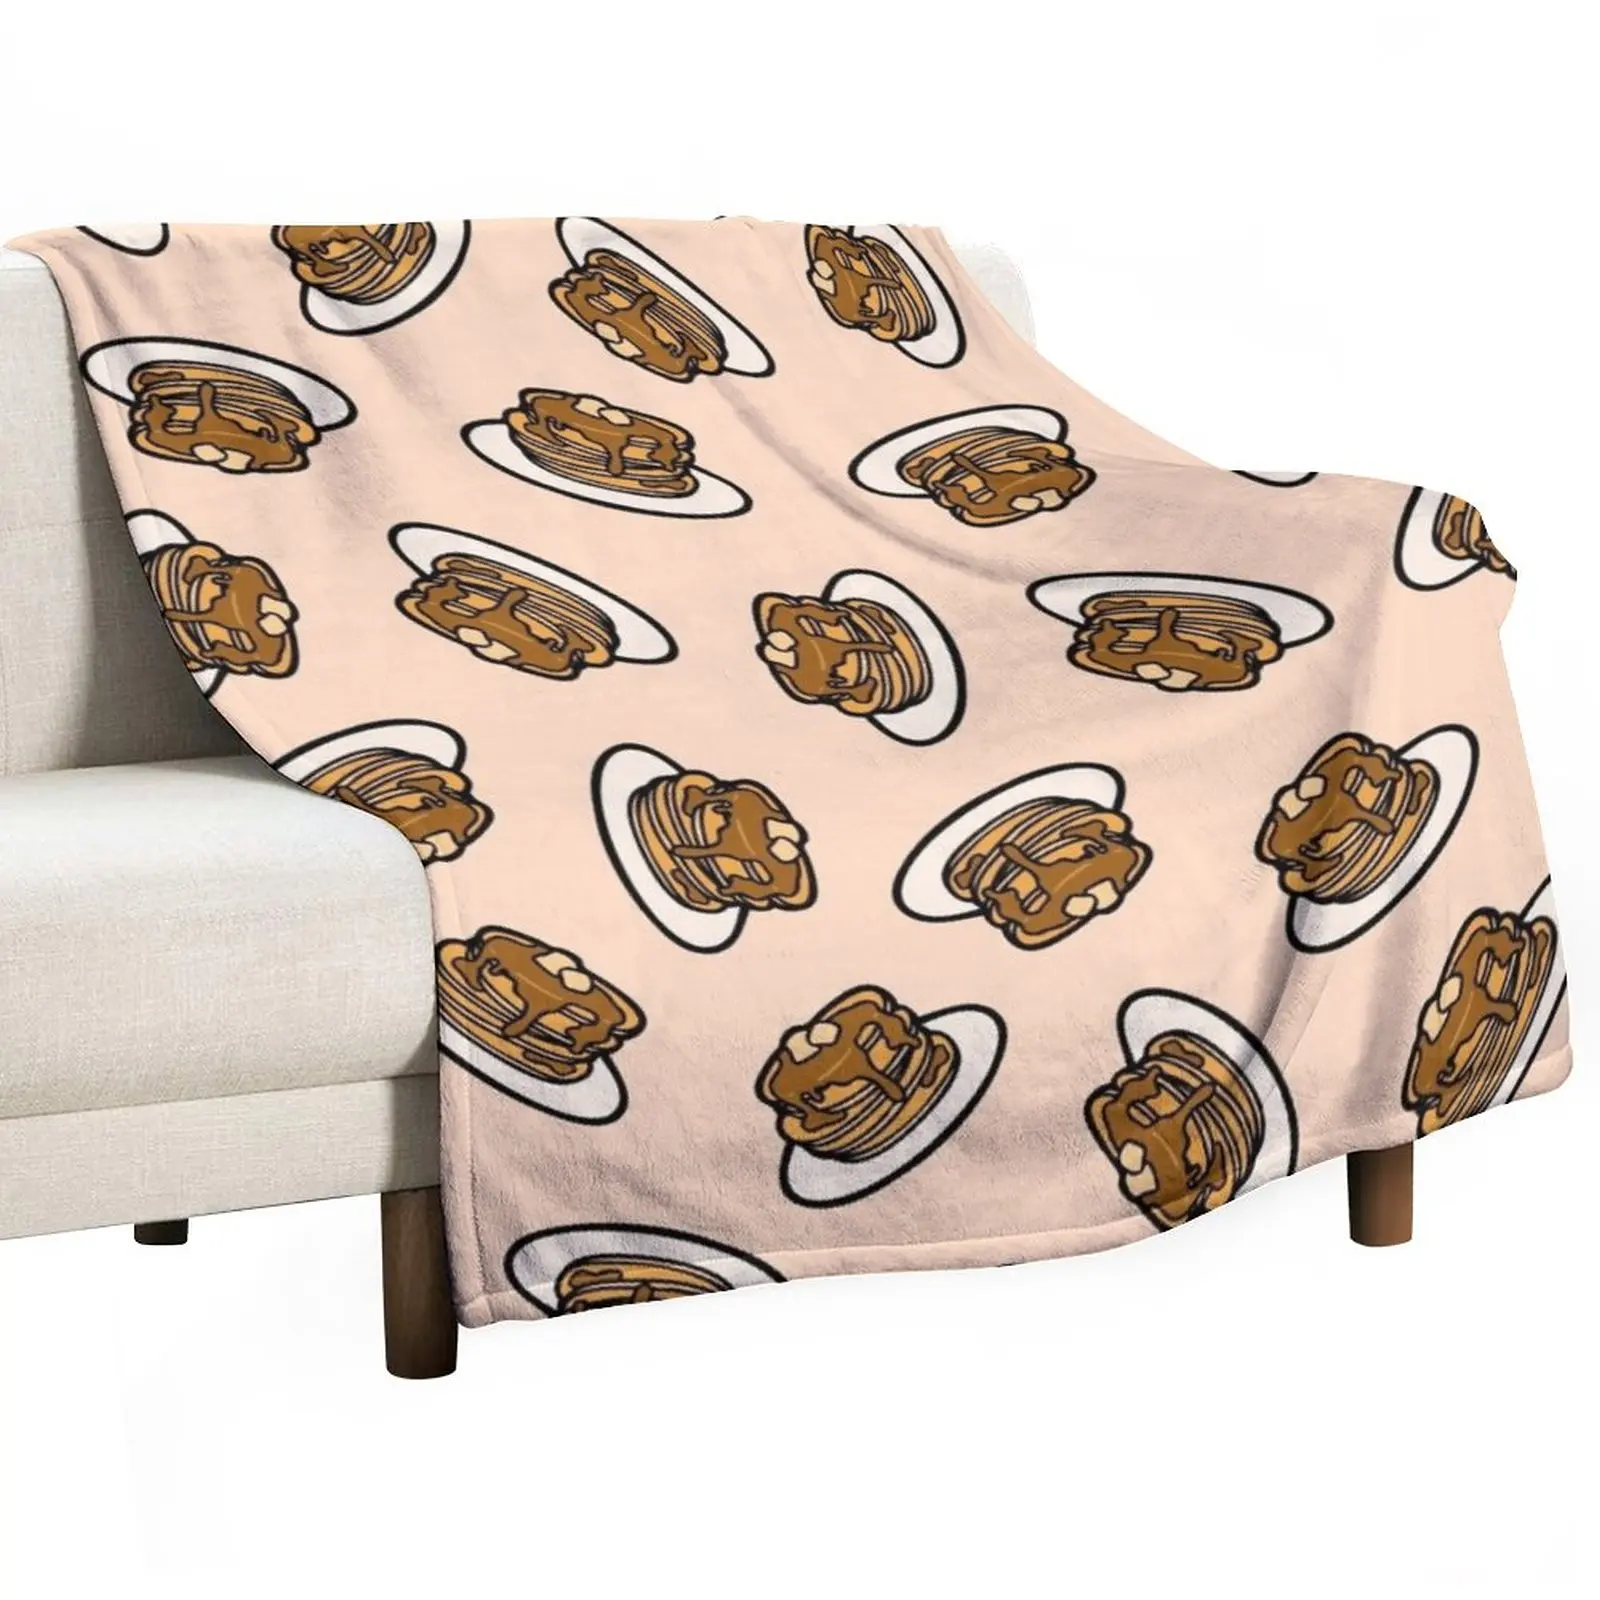 

Pancakes with Butter and Syrup Pattern on Pale Peach Throw Blanket Cute Blanket Soft Blanket